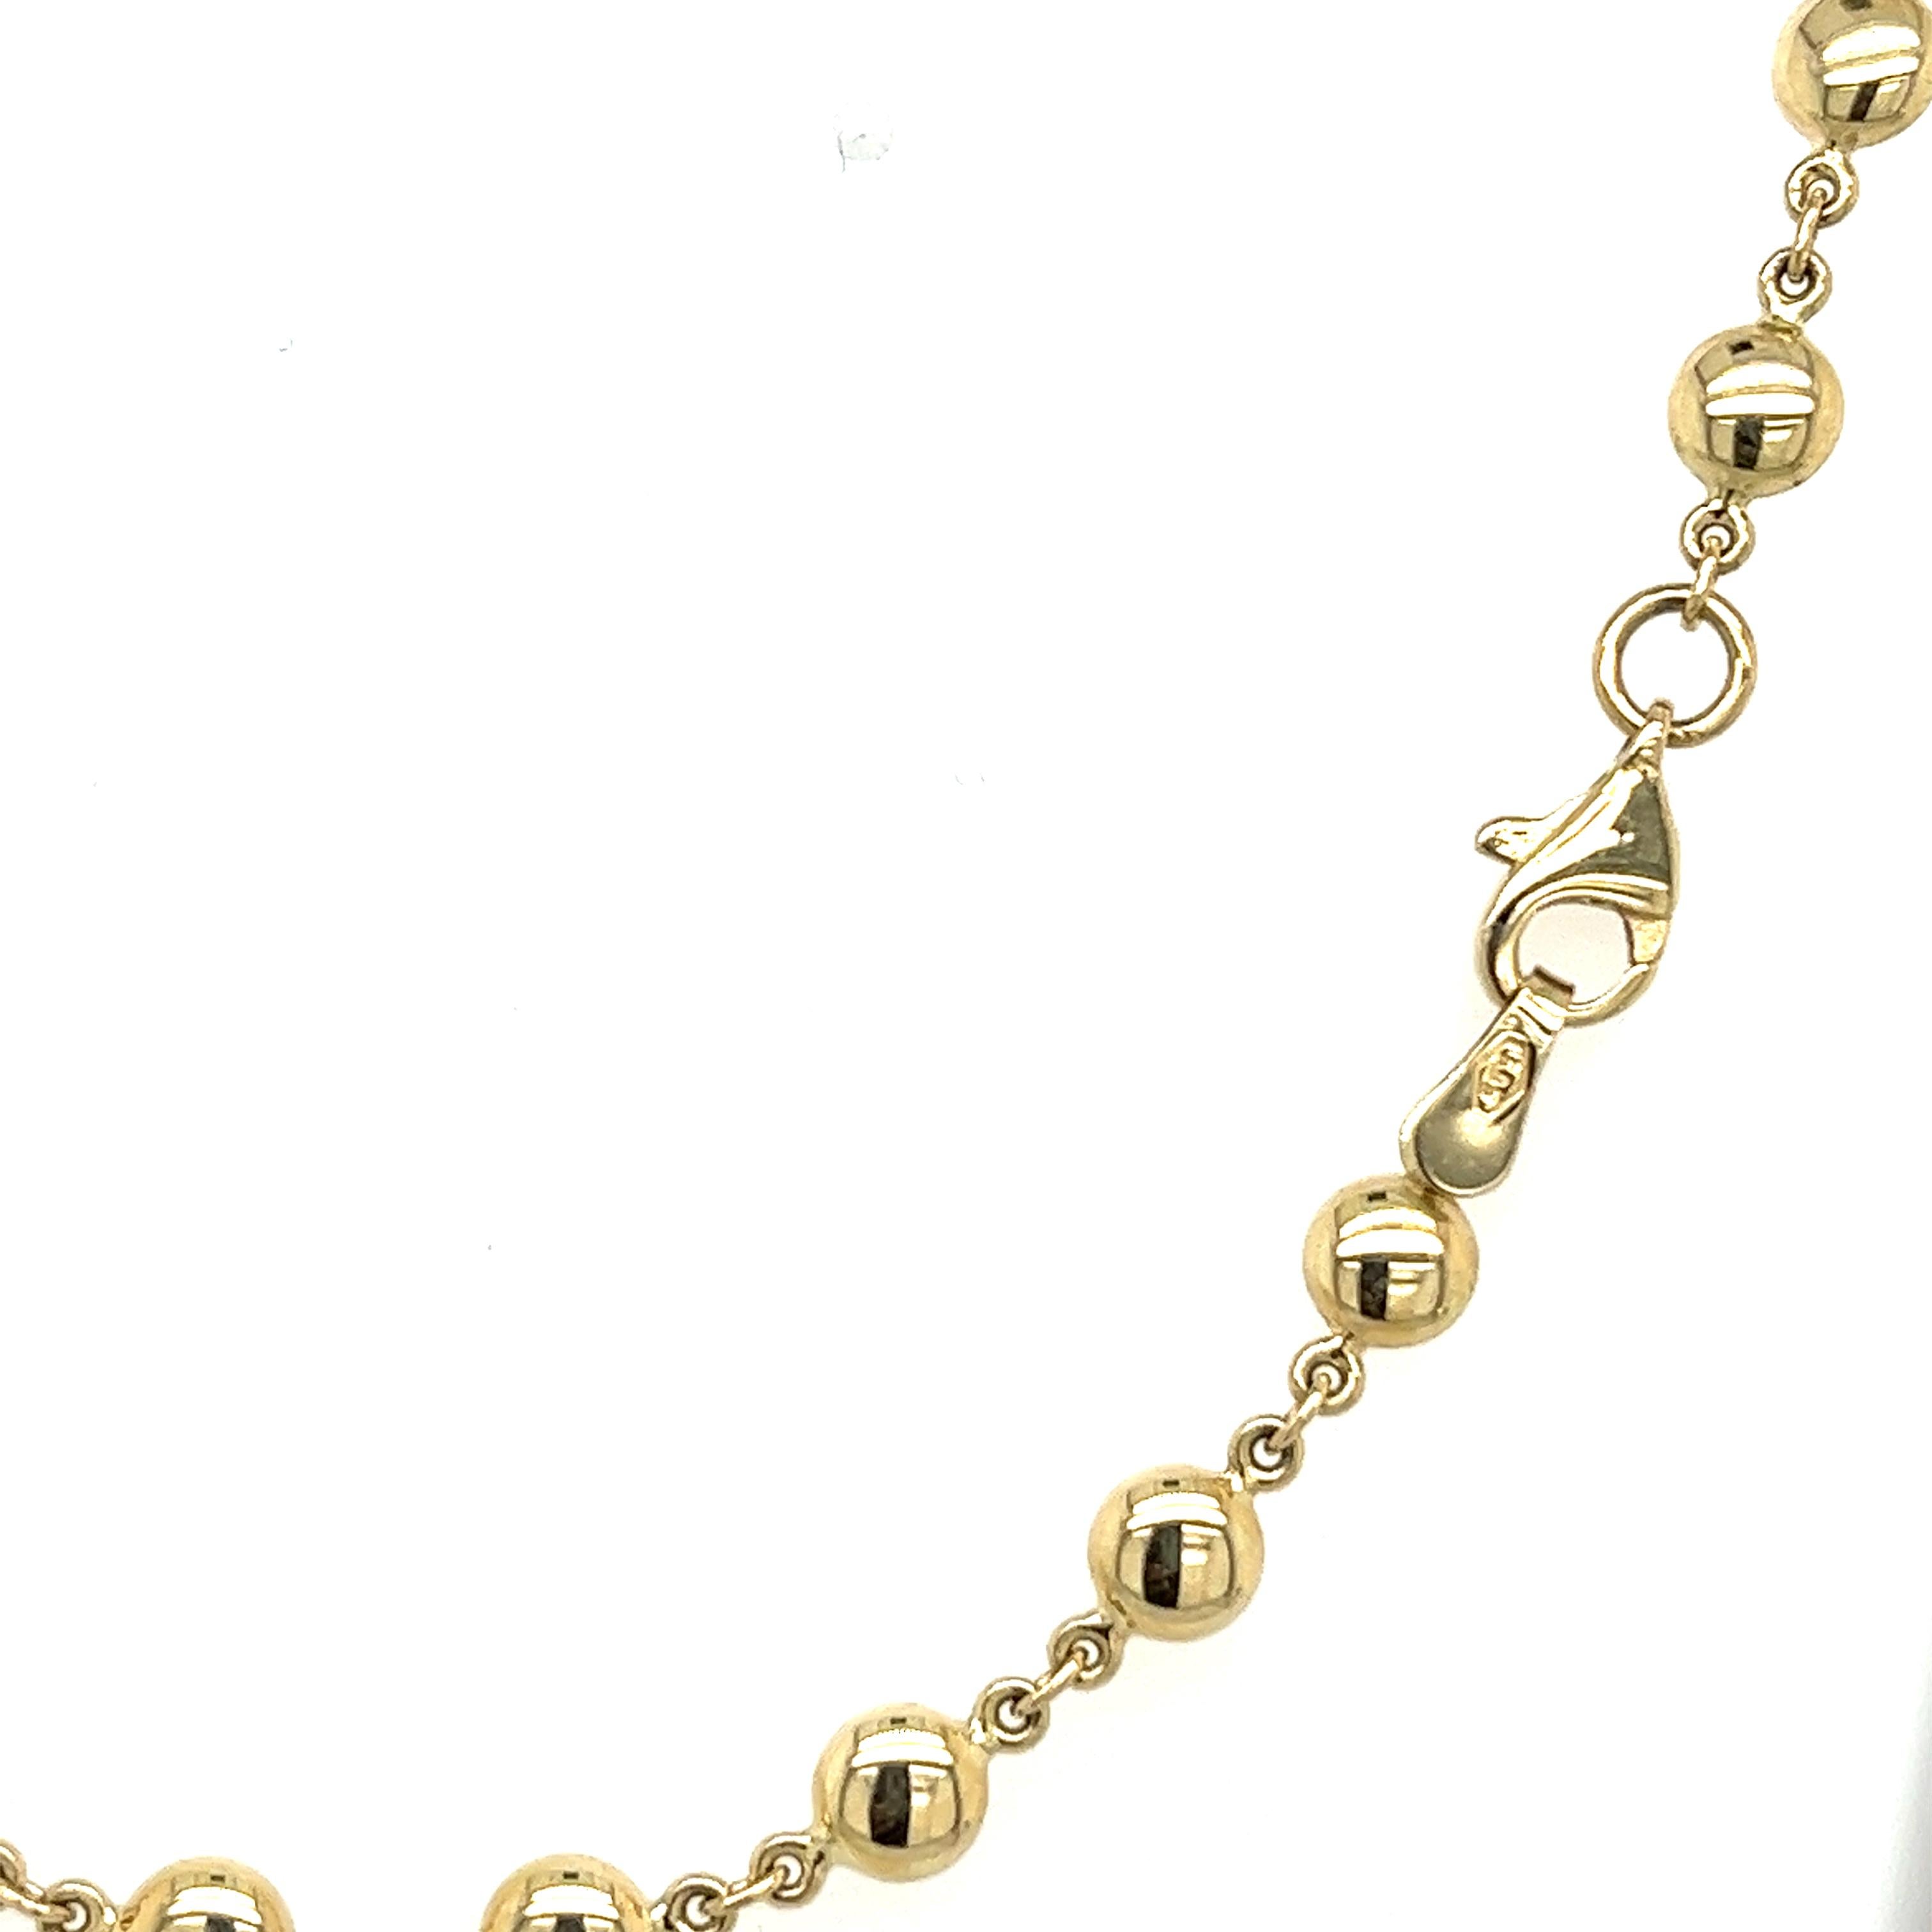 Solid 14ct Yellow Gold Italian Ball Bead Chain Classic Necklace 18